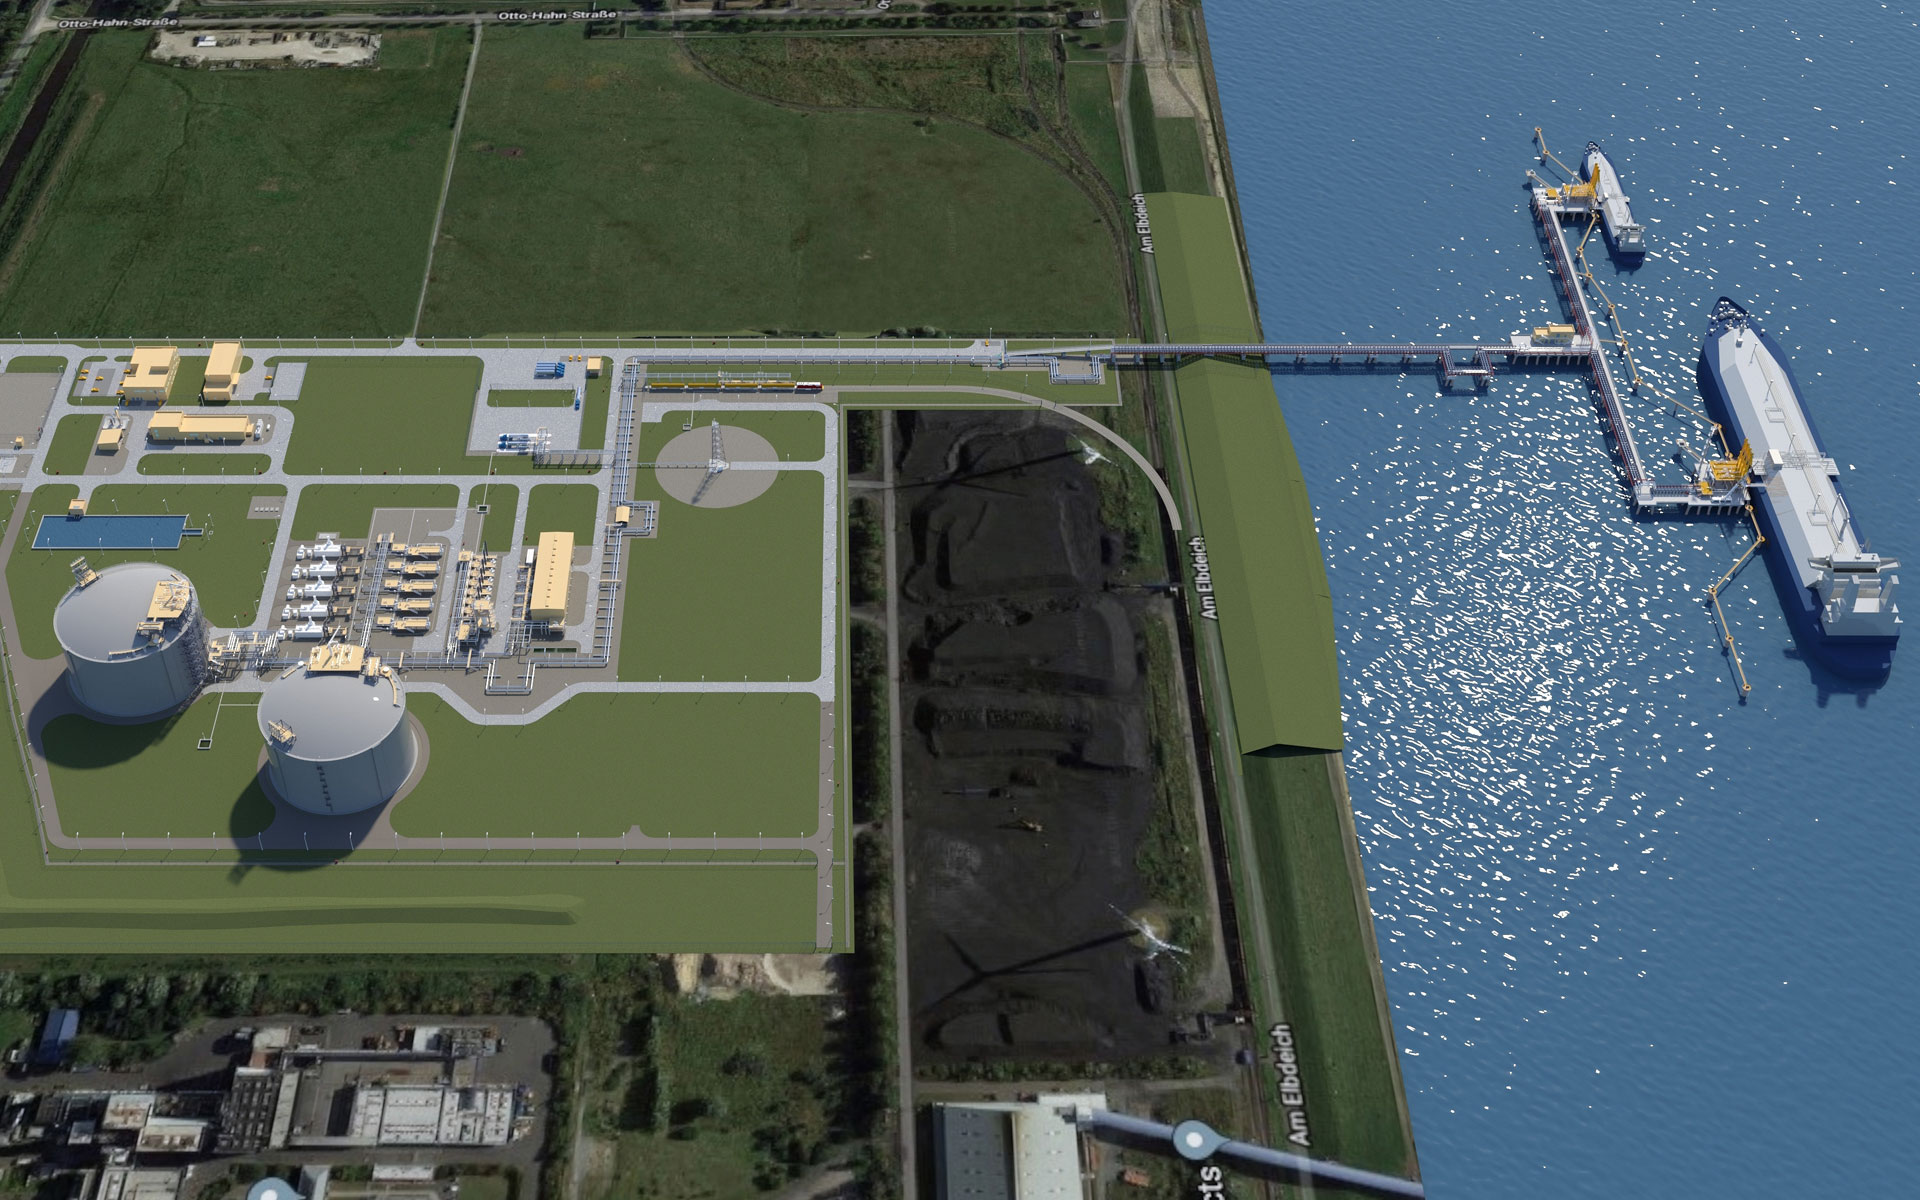 Germany to back construction of two LNG import terminals to cut pipeline gas reliance